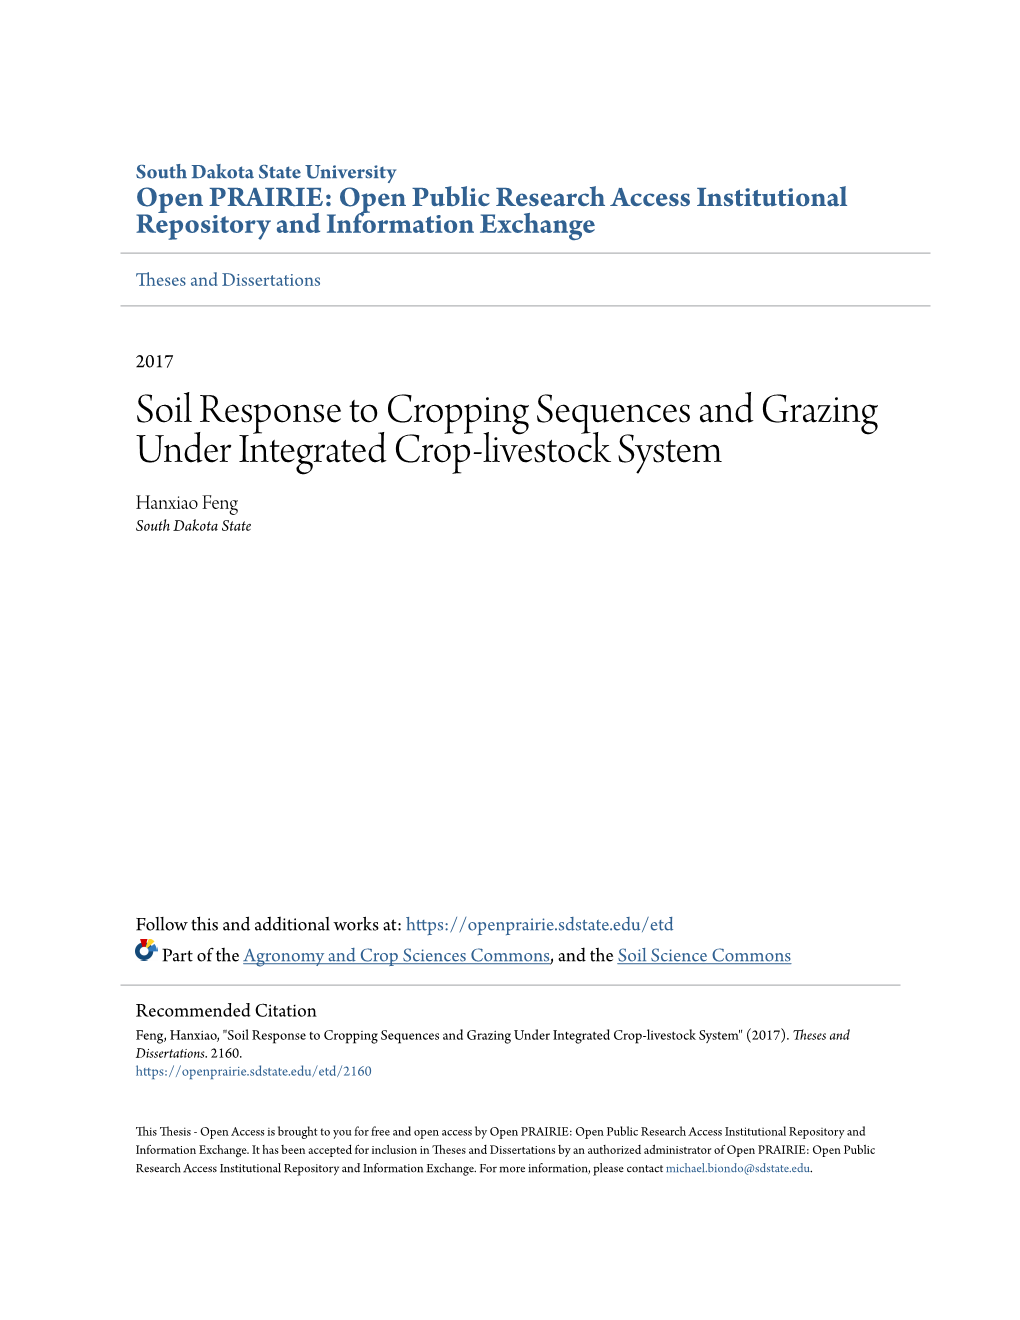 Soil Response to Cropping Sequences and Grazing Under Integrated Crop-Livestock System Hanxiao Feng South Dakota State